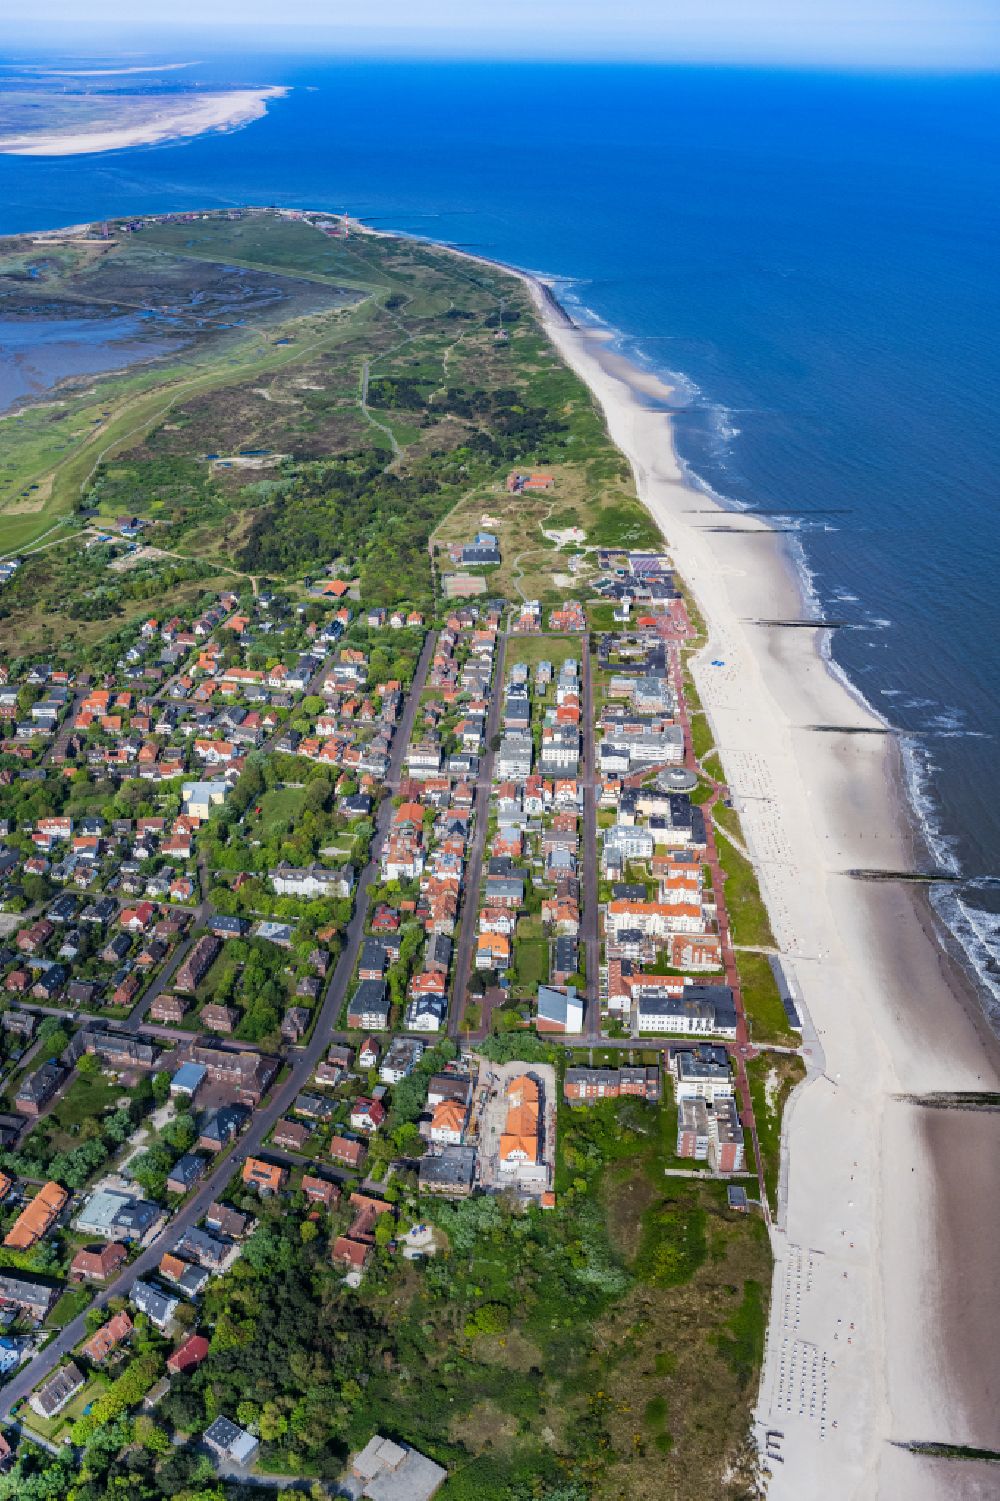 Wangerooge from above - View of the village of Wangerooge on the island of the same name in the Wadden Sea of the North Sea in the state of Lower Saxony. Wangerooge is the Eastern-most inhabited of the East Frisian Islands. It has a sand beach and is a spa resort